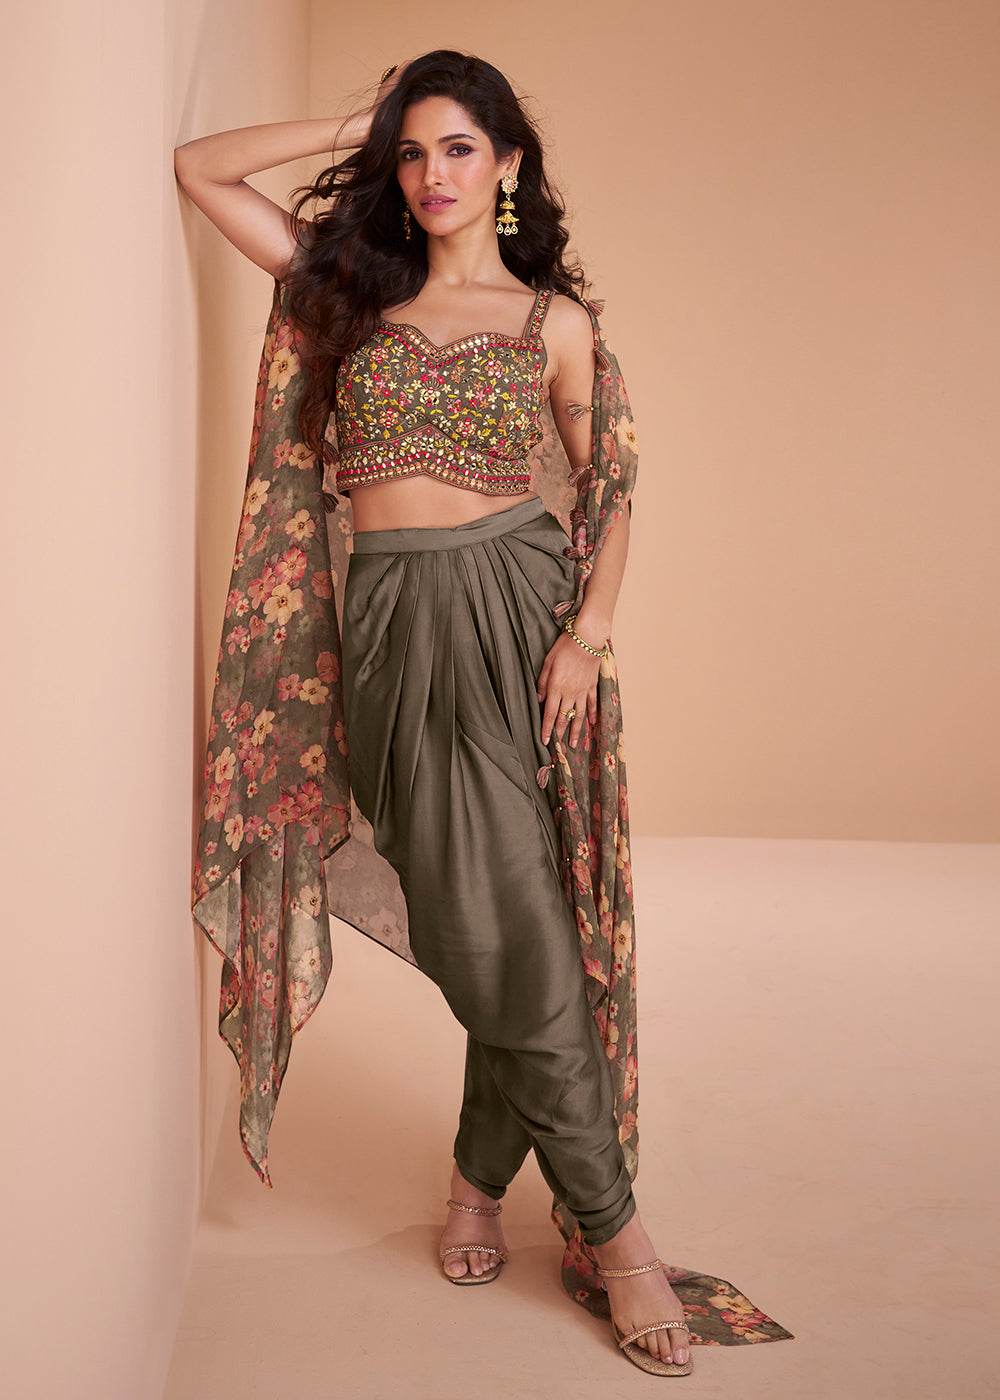 Buy Now Olive Brown Satin Silk Indo Western Style Dhoti Pant Suit Online in USA, UK, Canada, Germany, Australia & Worldwide at Empress Clothing.